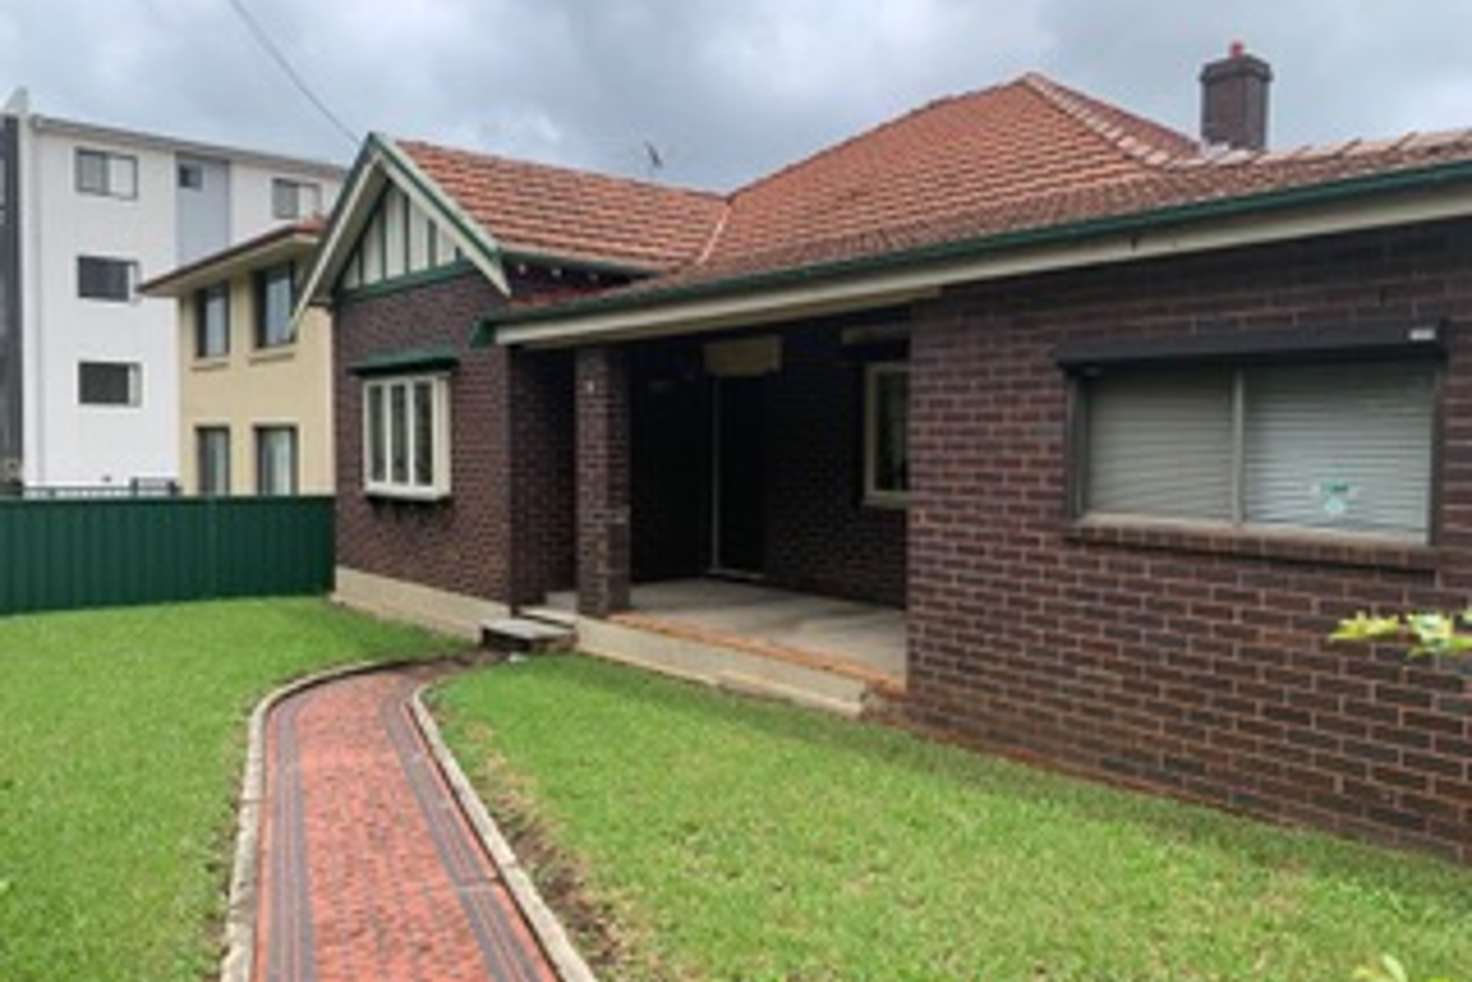 Main view of Homely house listing, 34 Macarthur Street, Parramatta NSW 2150